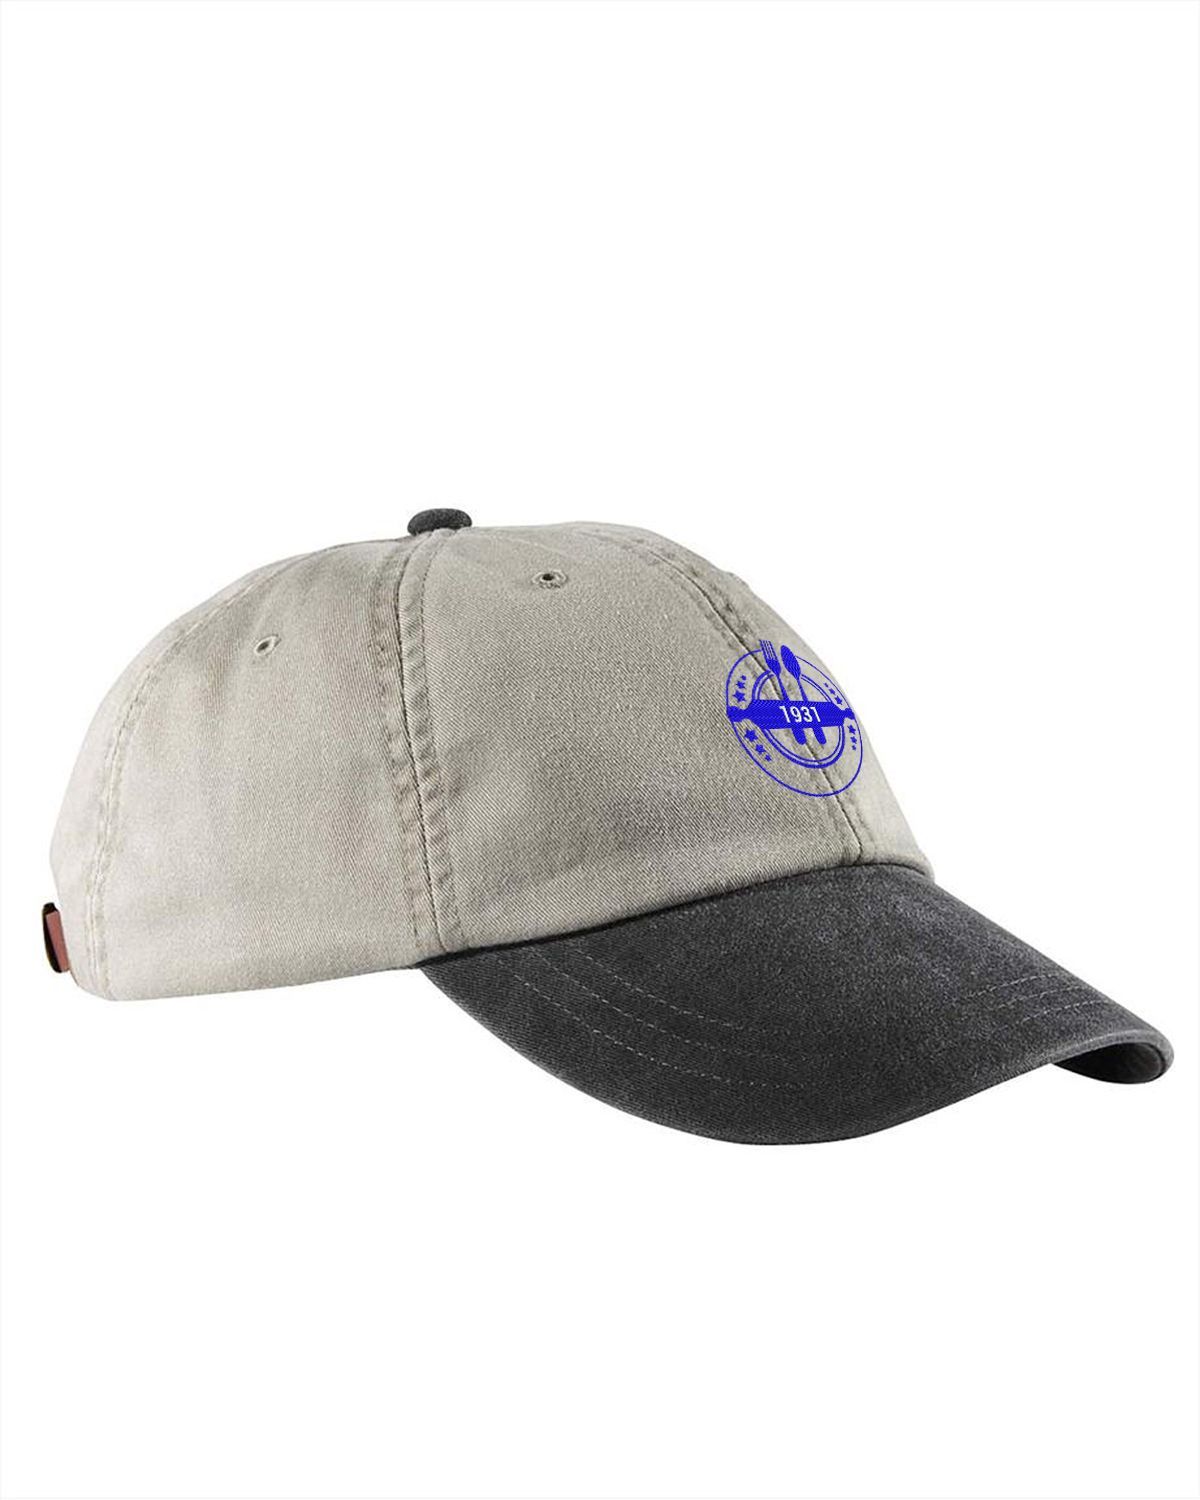 Buy Adams AD969 6 Panel Low Profile Washed Pigment Dyed Cap